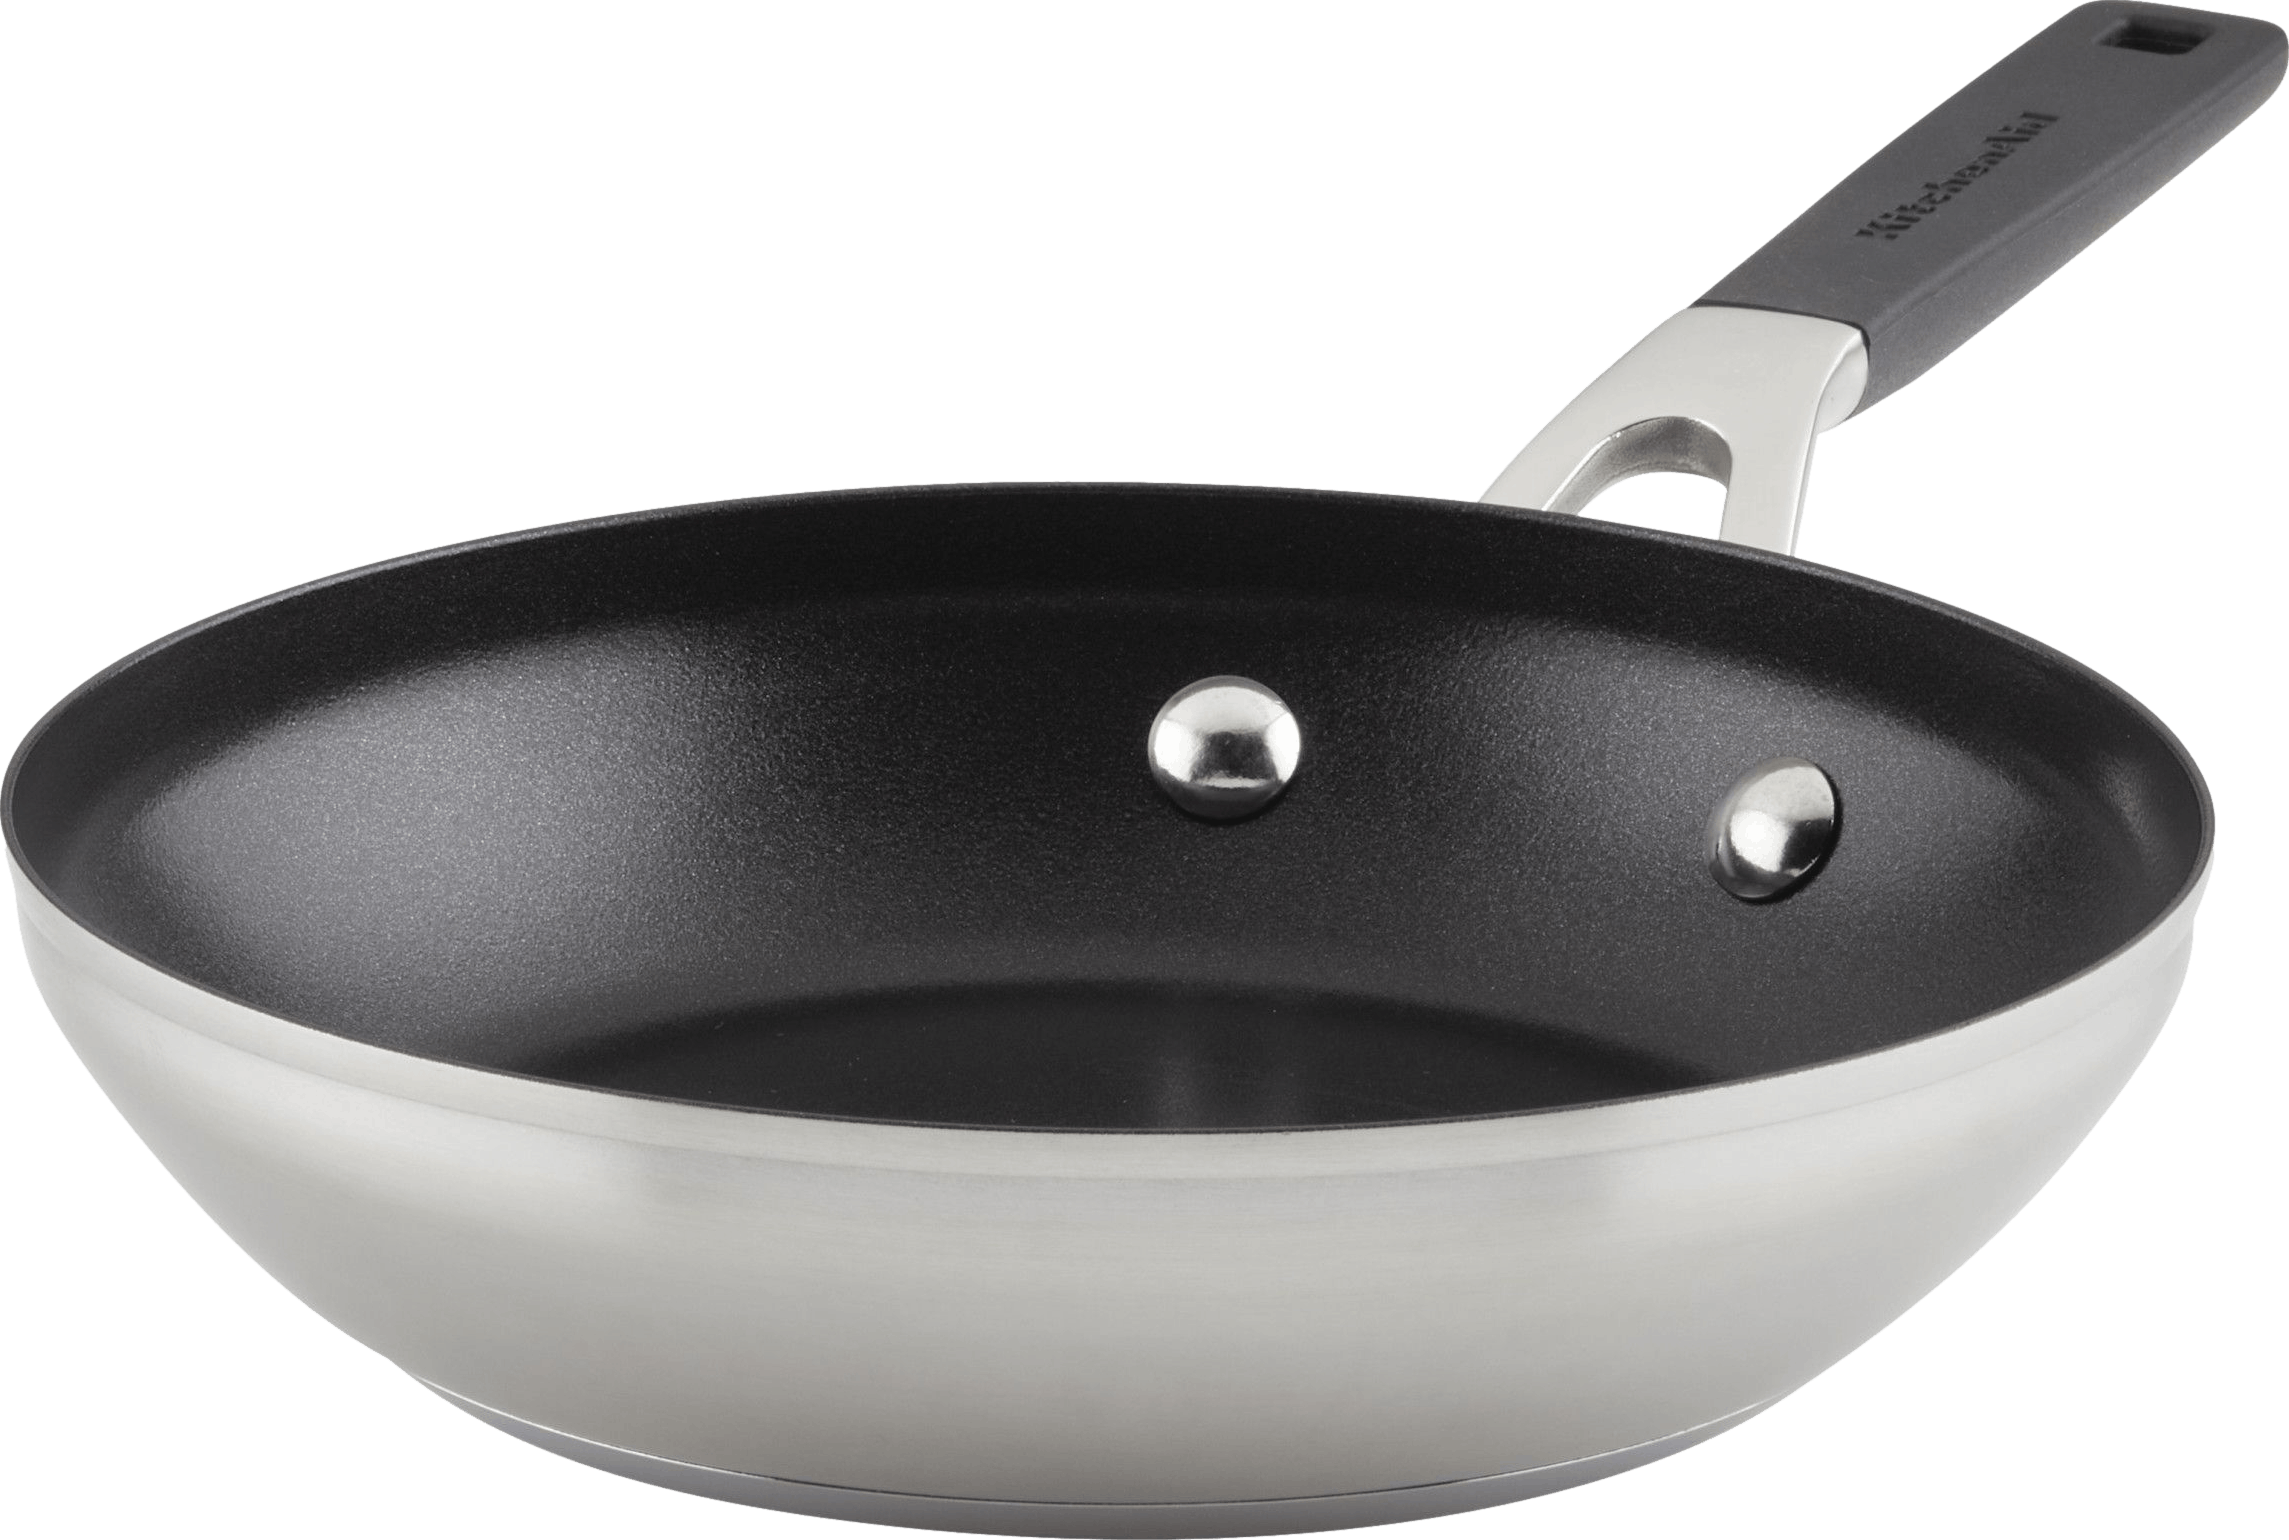  Anolon Hard Anodized Nonstick Mini Skillet/Frying/Egg Pan,  Stainless Steel Handle, (6.5), Gray: Home & Kitchen